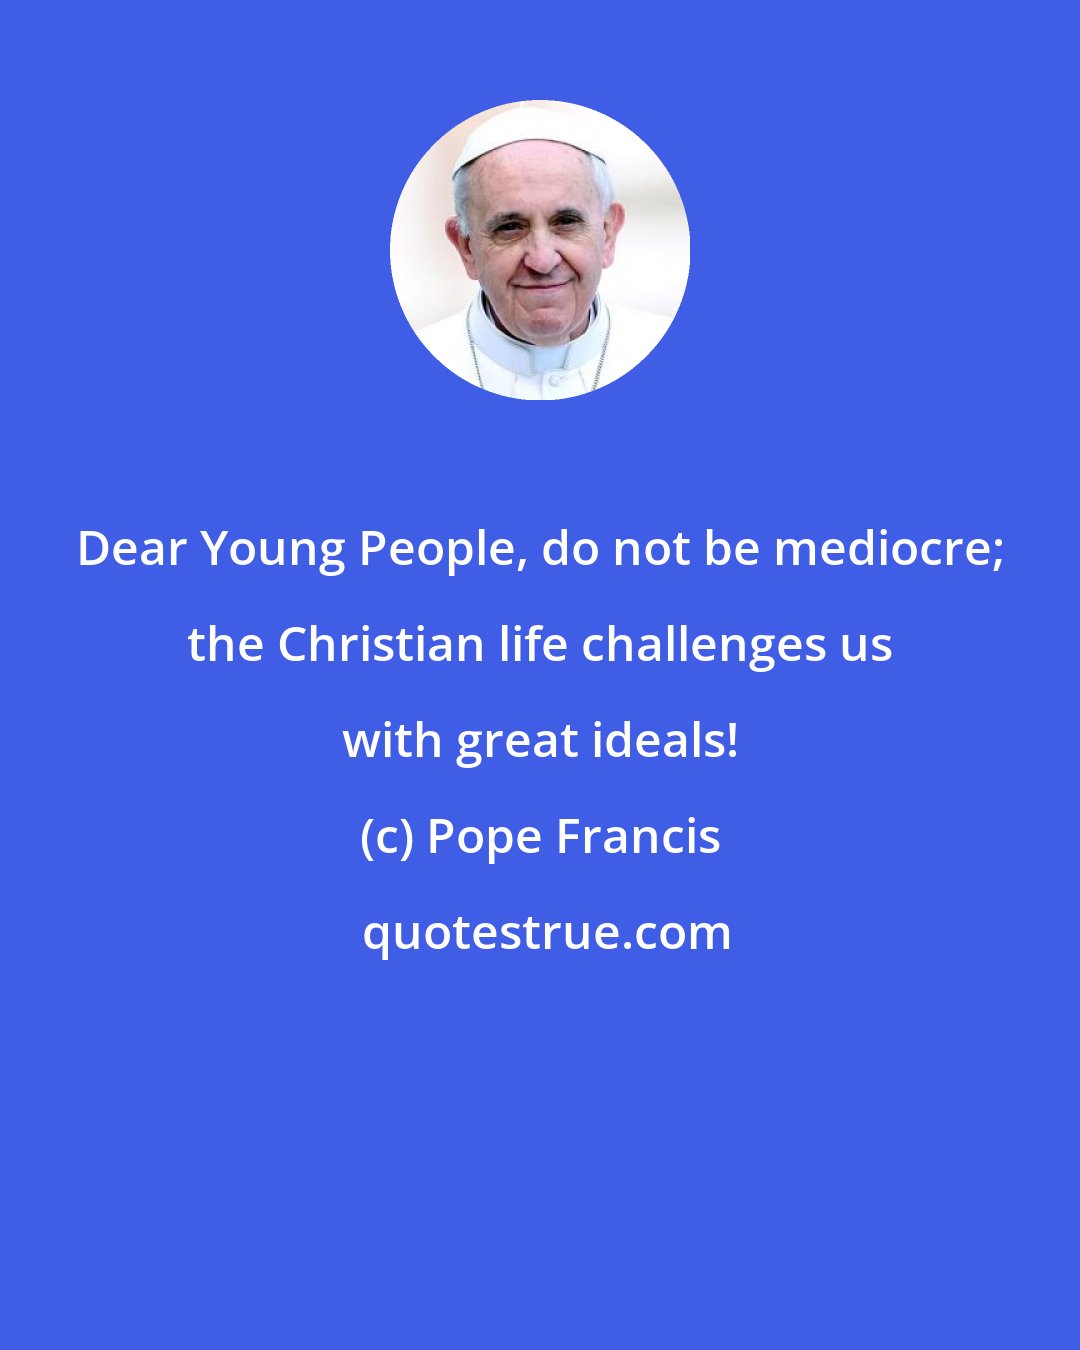 Pope Francis: Dear Young People, do not be mediocre; the Christian life challenges us with great ideals!